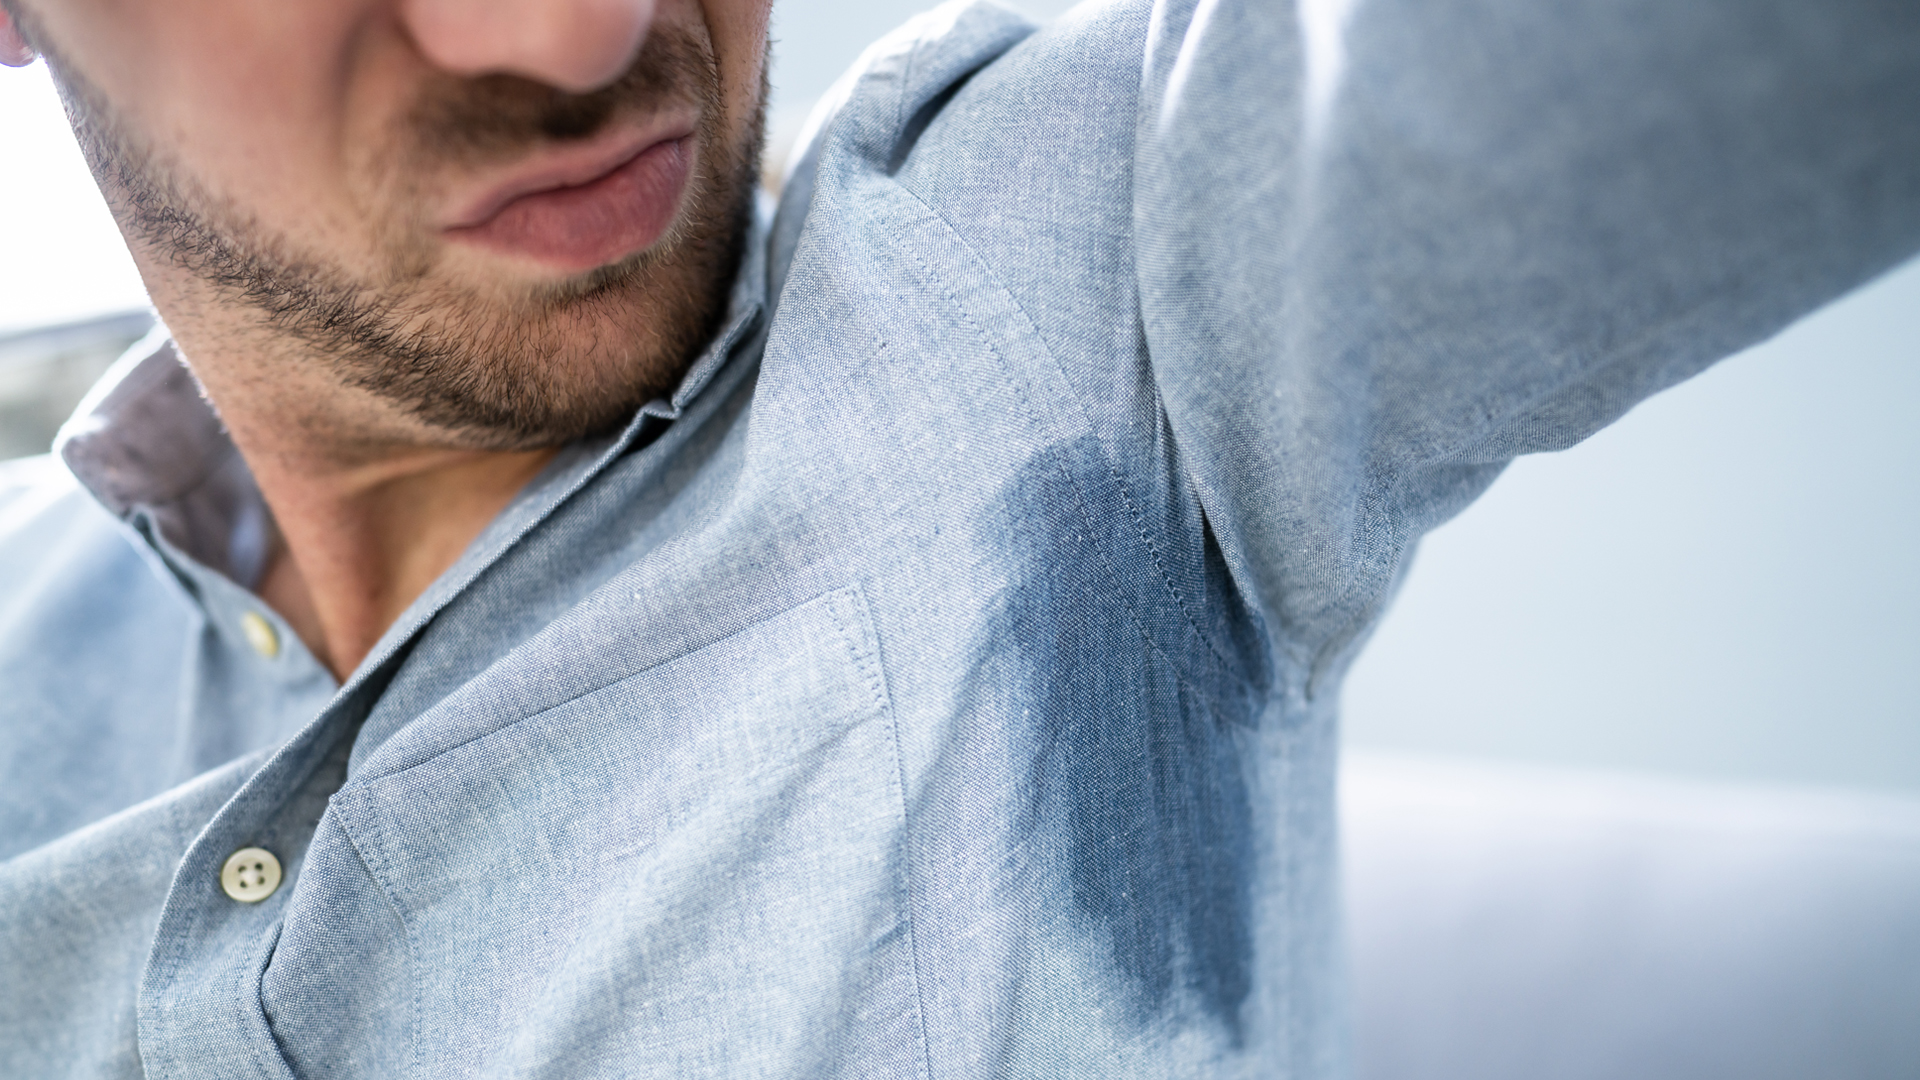 Hyperhidrosis – what is it? Causes and treatment of increased sweating